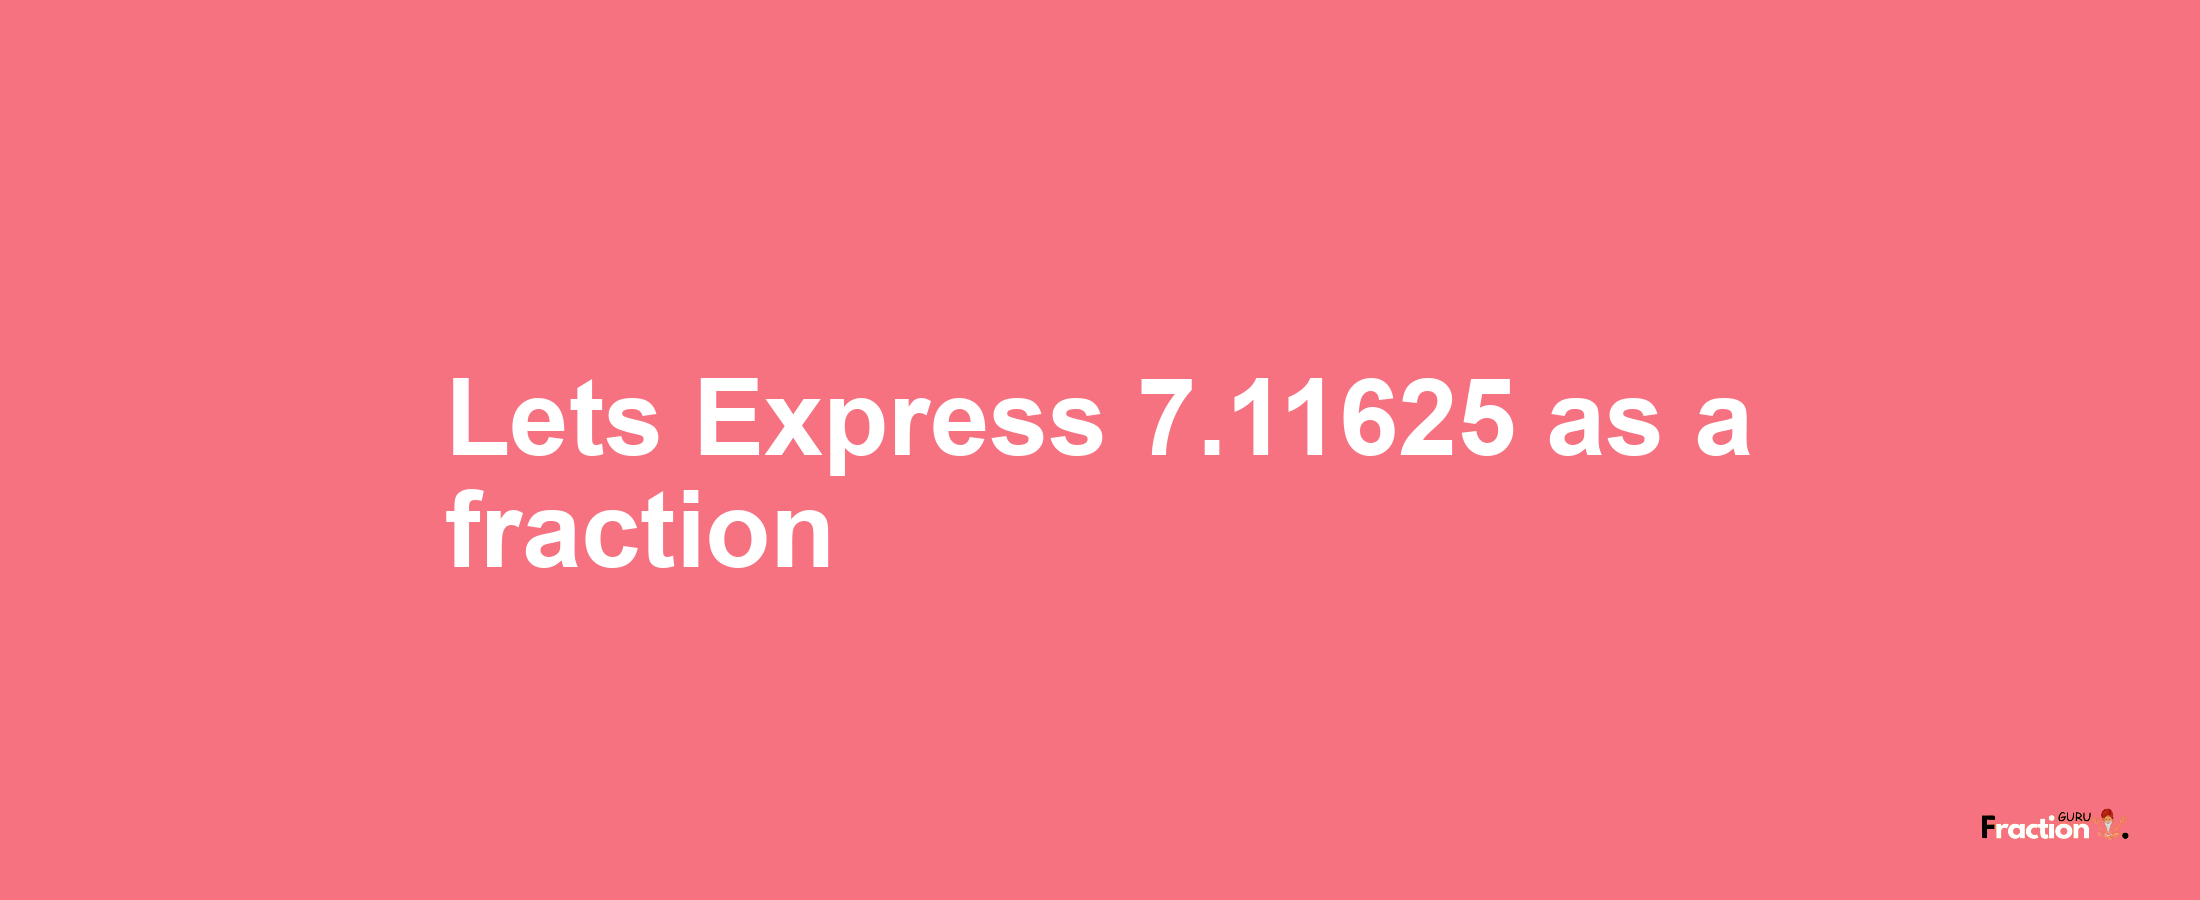 Lets Express 7.11625 as afraction